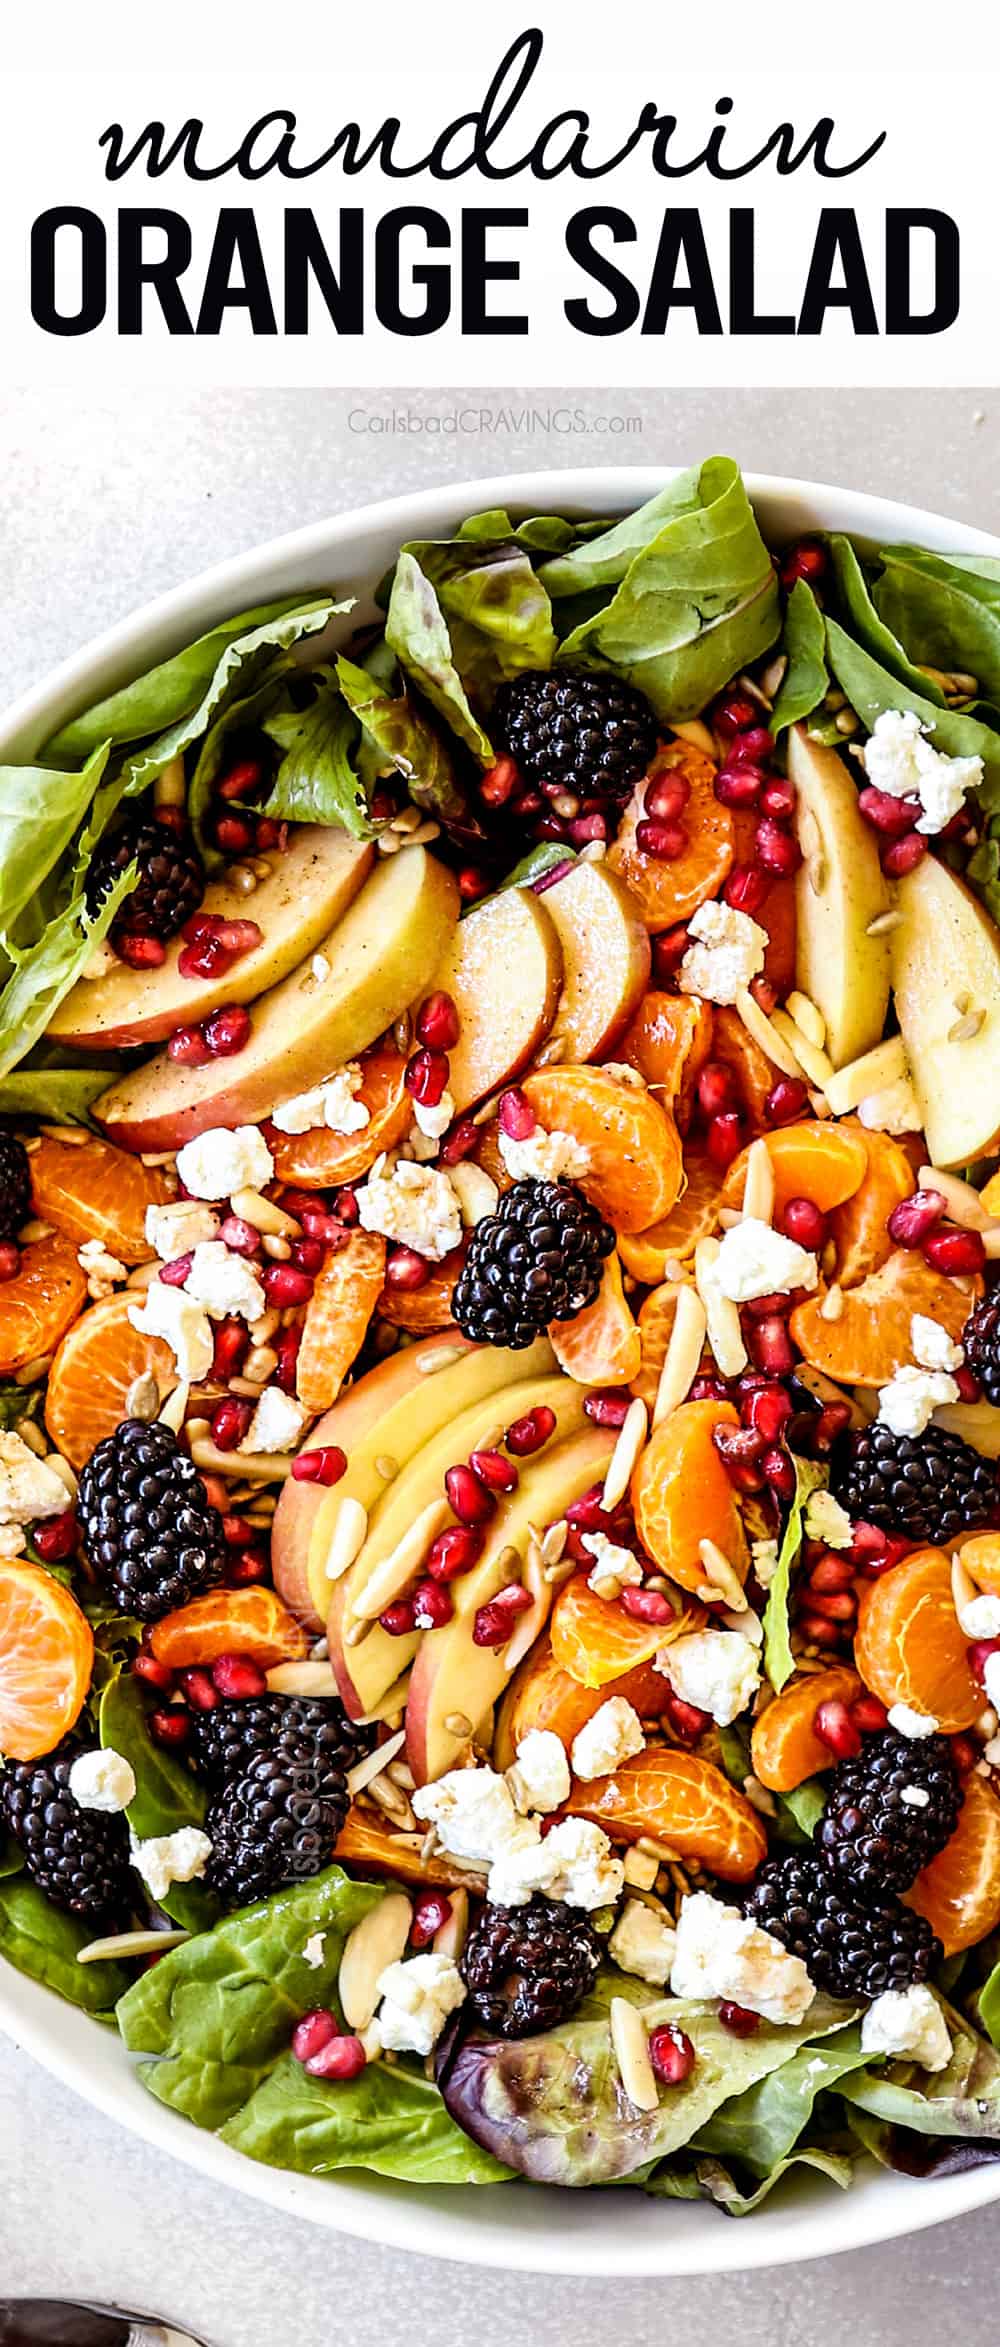 top view of Mandarin Orange Salad with mandarins, apples and blackberries in a white bowl